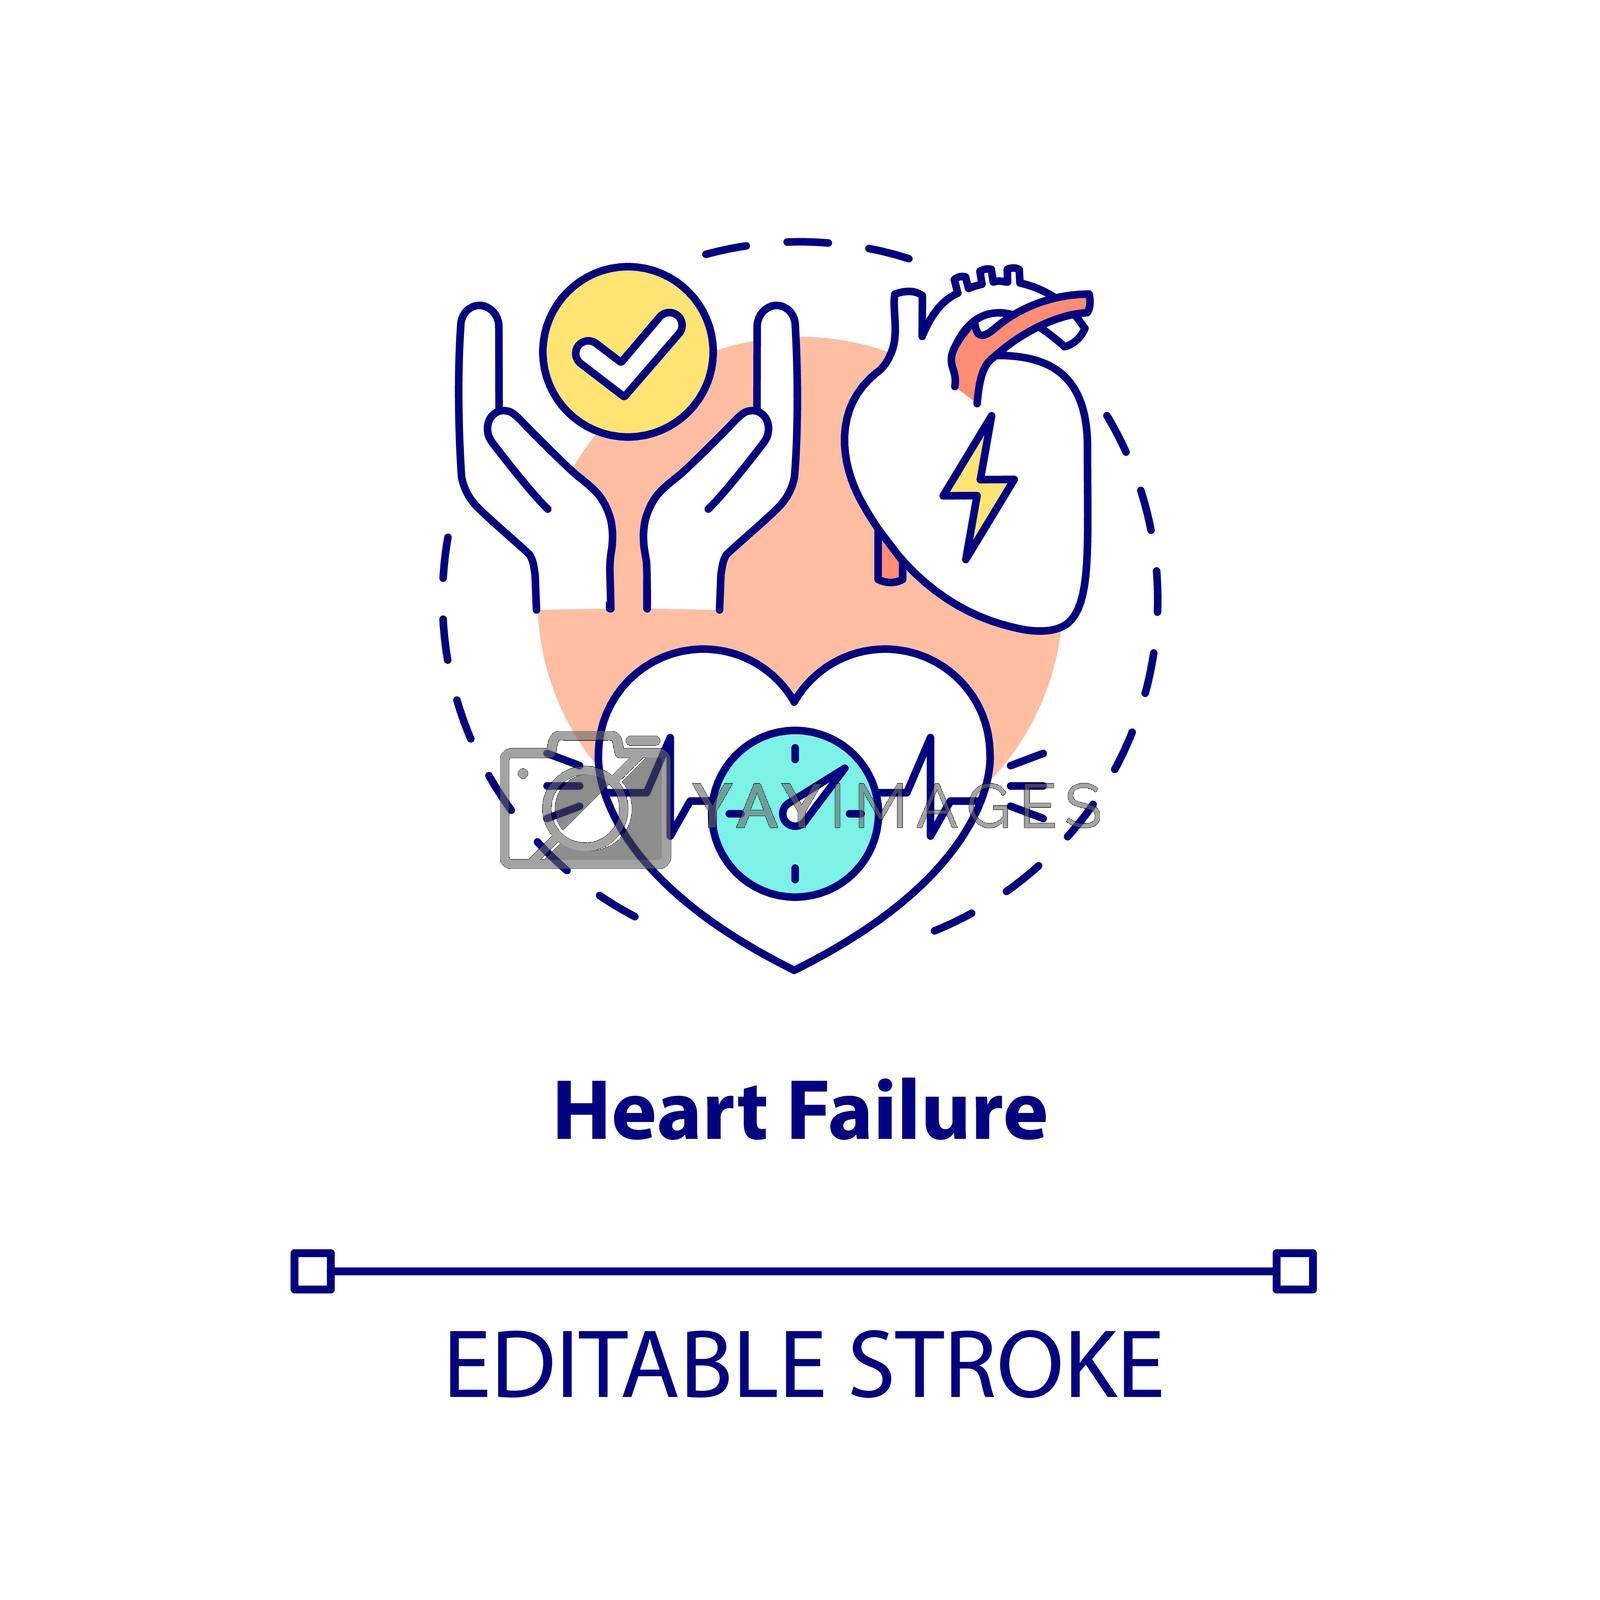 Royalty free image of Heart failure concept icon by bsd